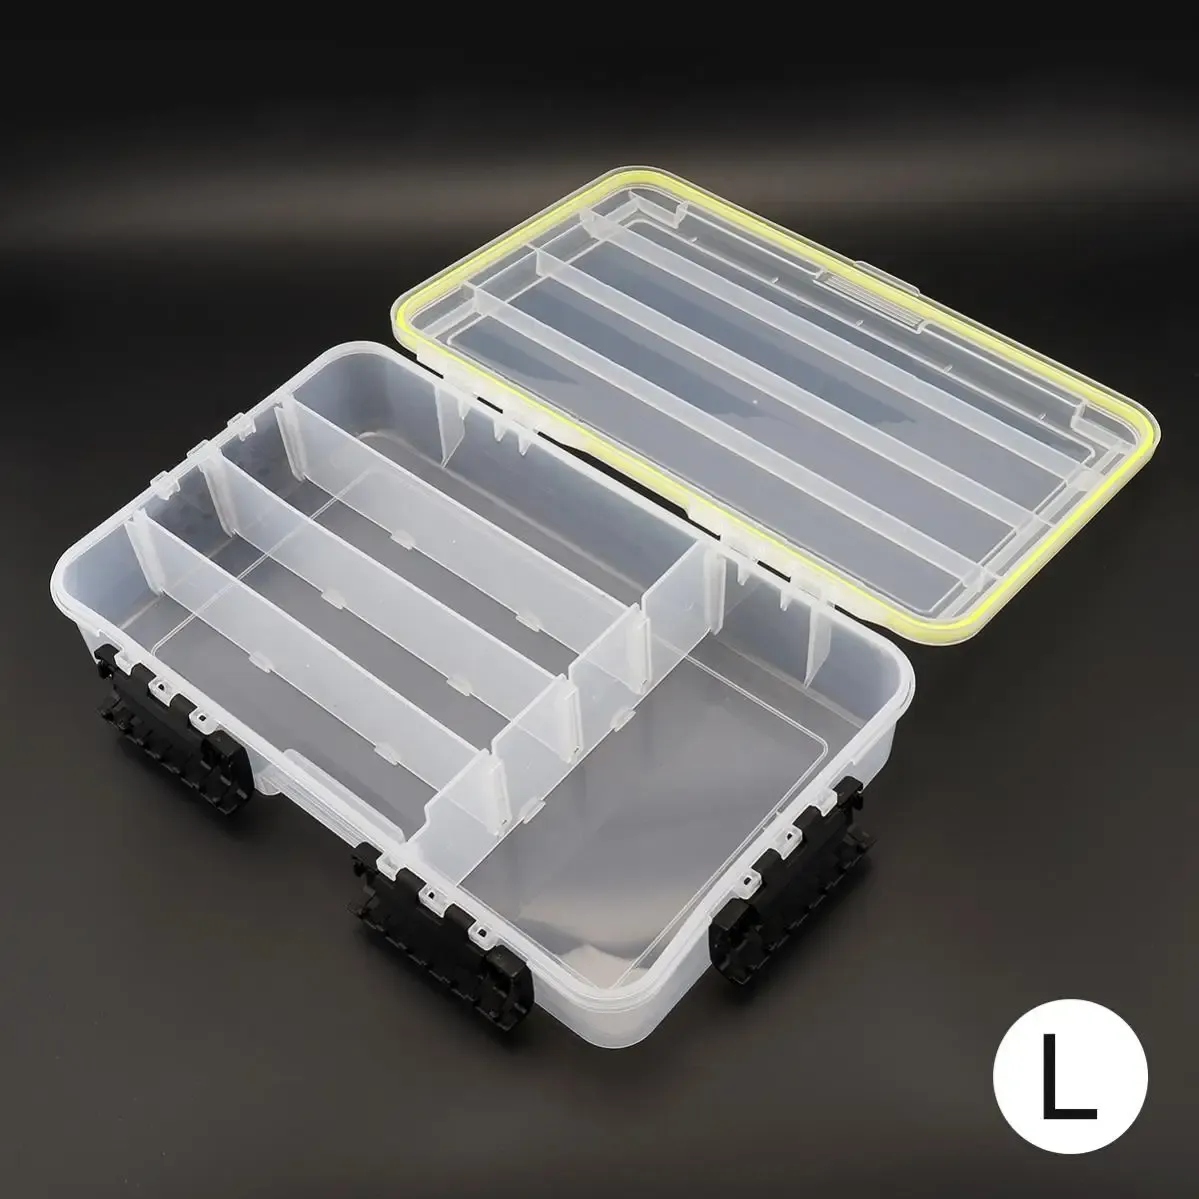 TackleBox Large Capacity Waterproof Fish Hook Lure Fake Bait Storage Box 3  Sizes S, M, L For Tactical Fishing And Waterproofing. From Lzqlp, $14.18